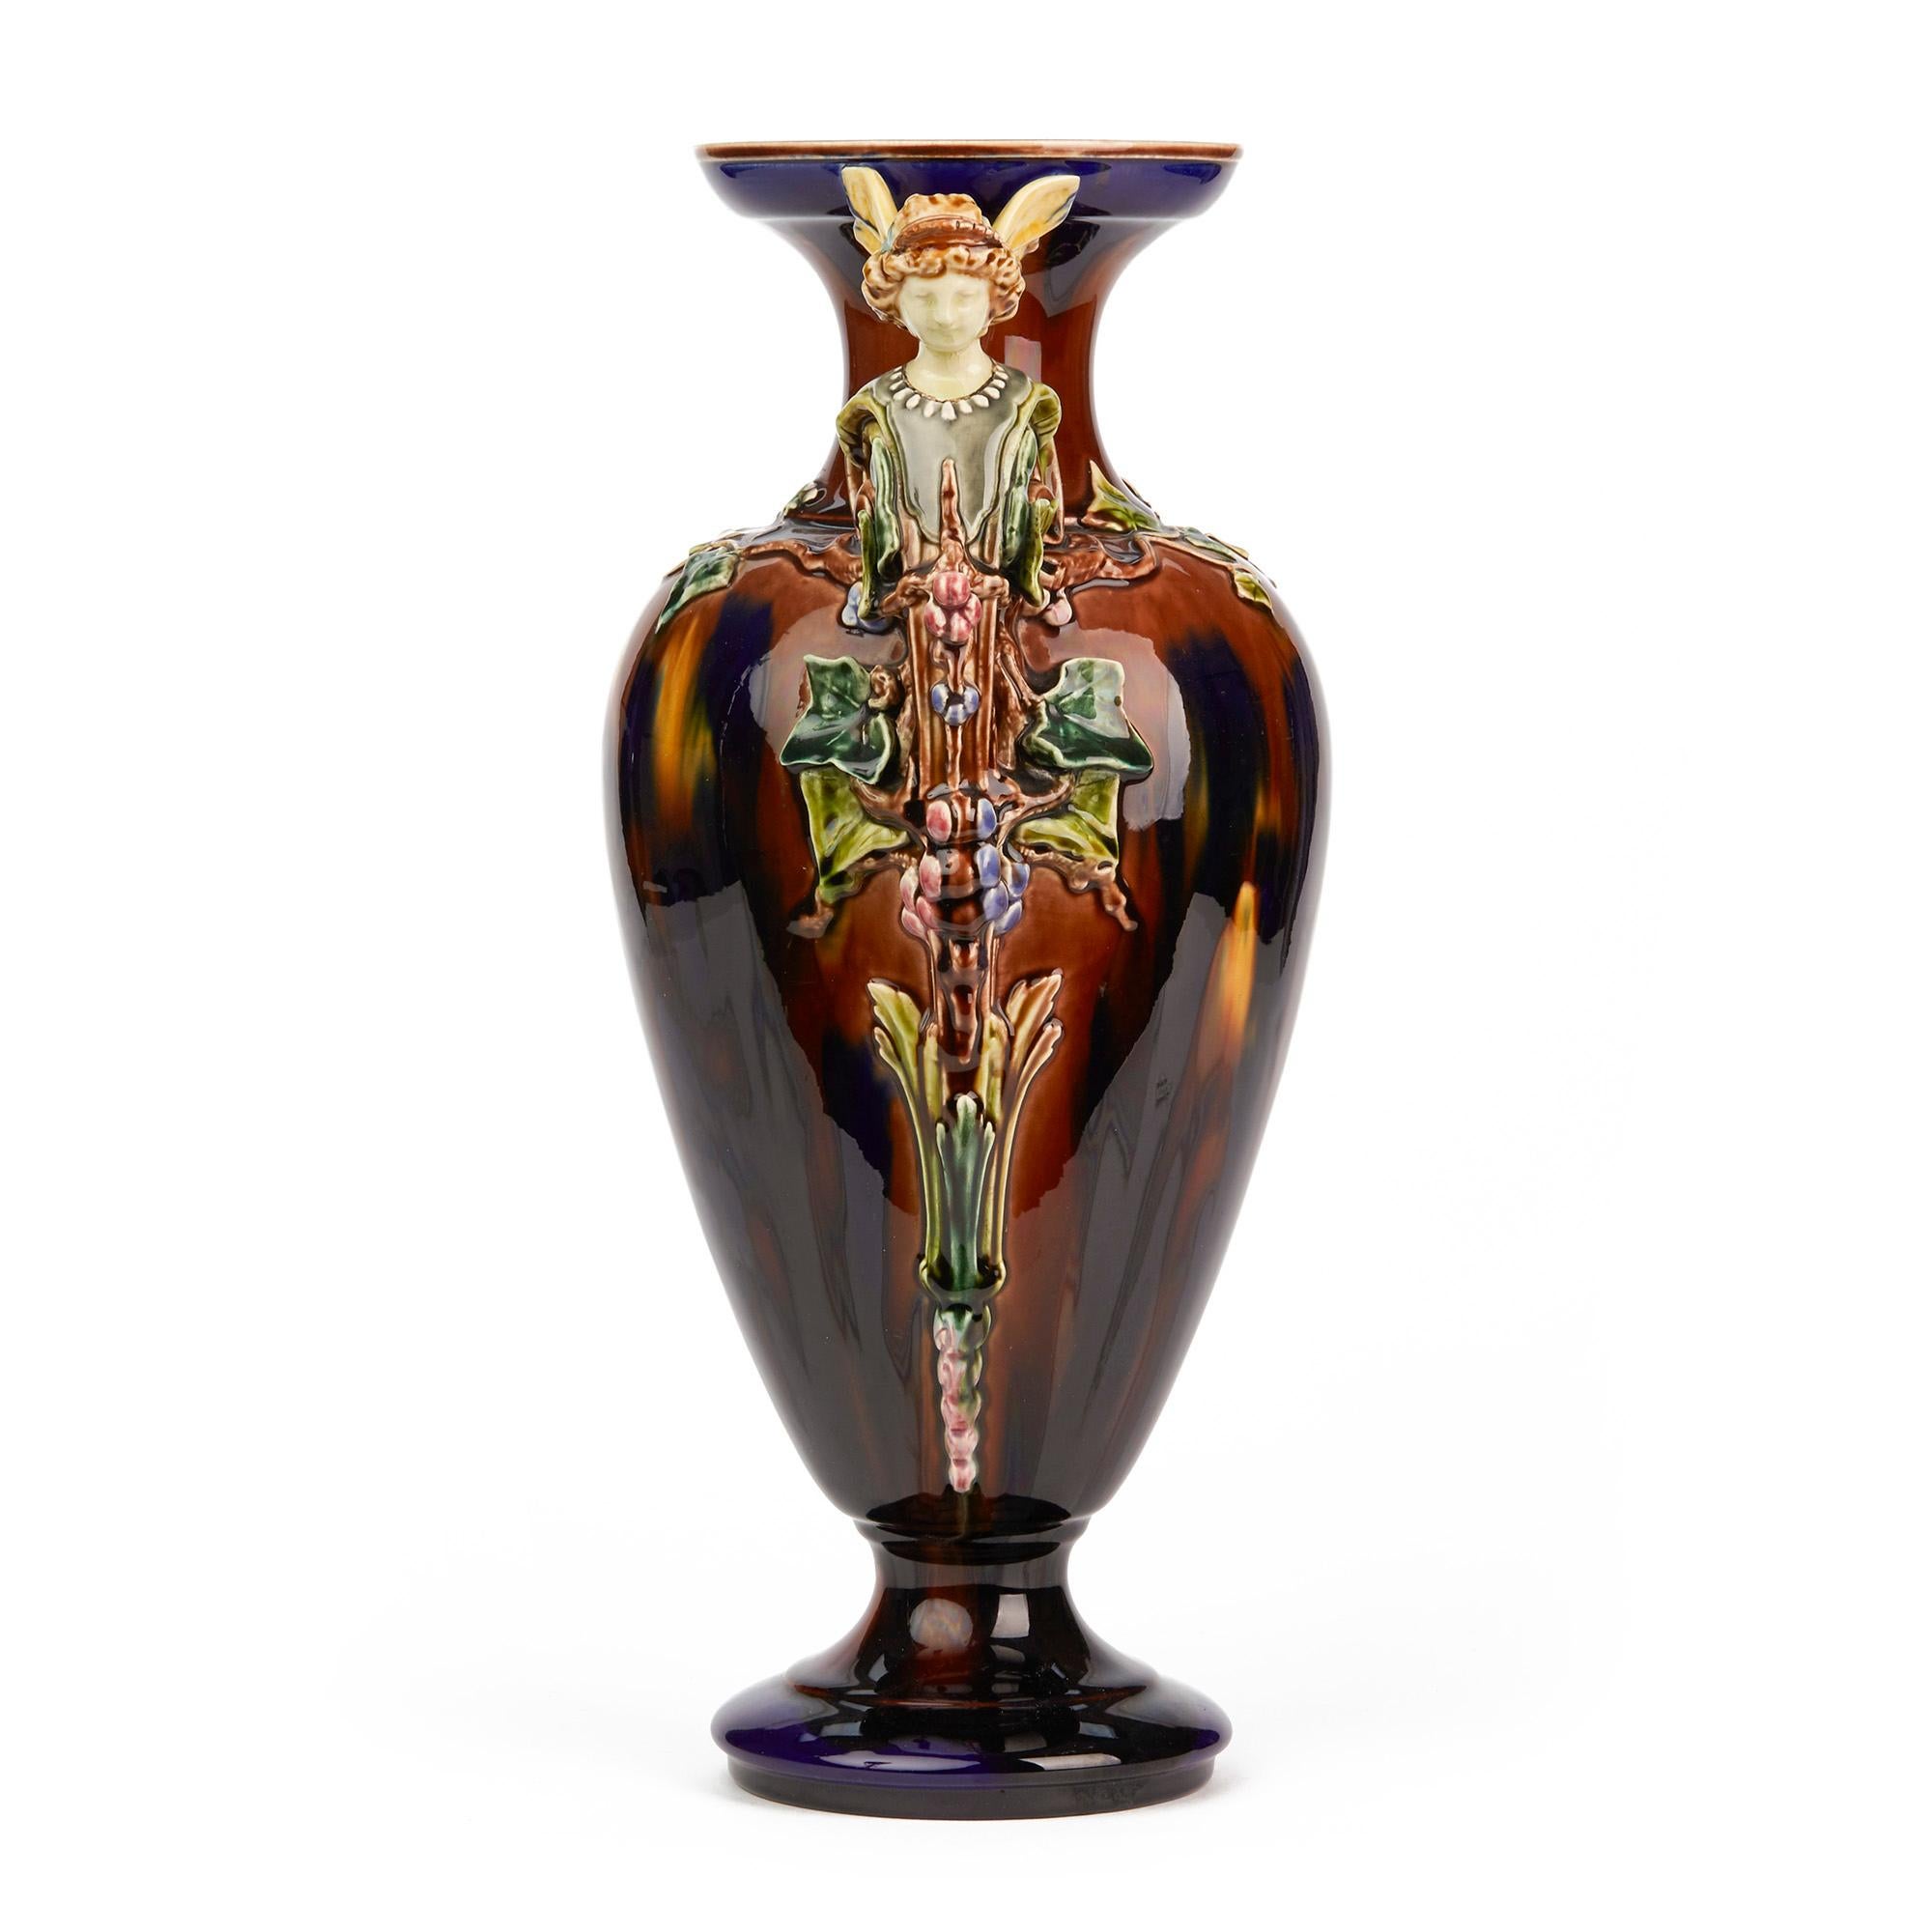 A large and exceptional French Majolica vase applied with maiden handles and decorated in beautiful streaked glazes by Sarreguemines. This rare example was probably an exhibition piece with a tall elegant shaped body and with handles formed as noble